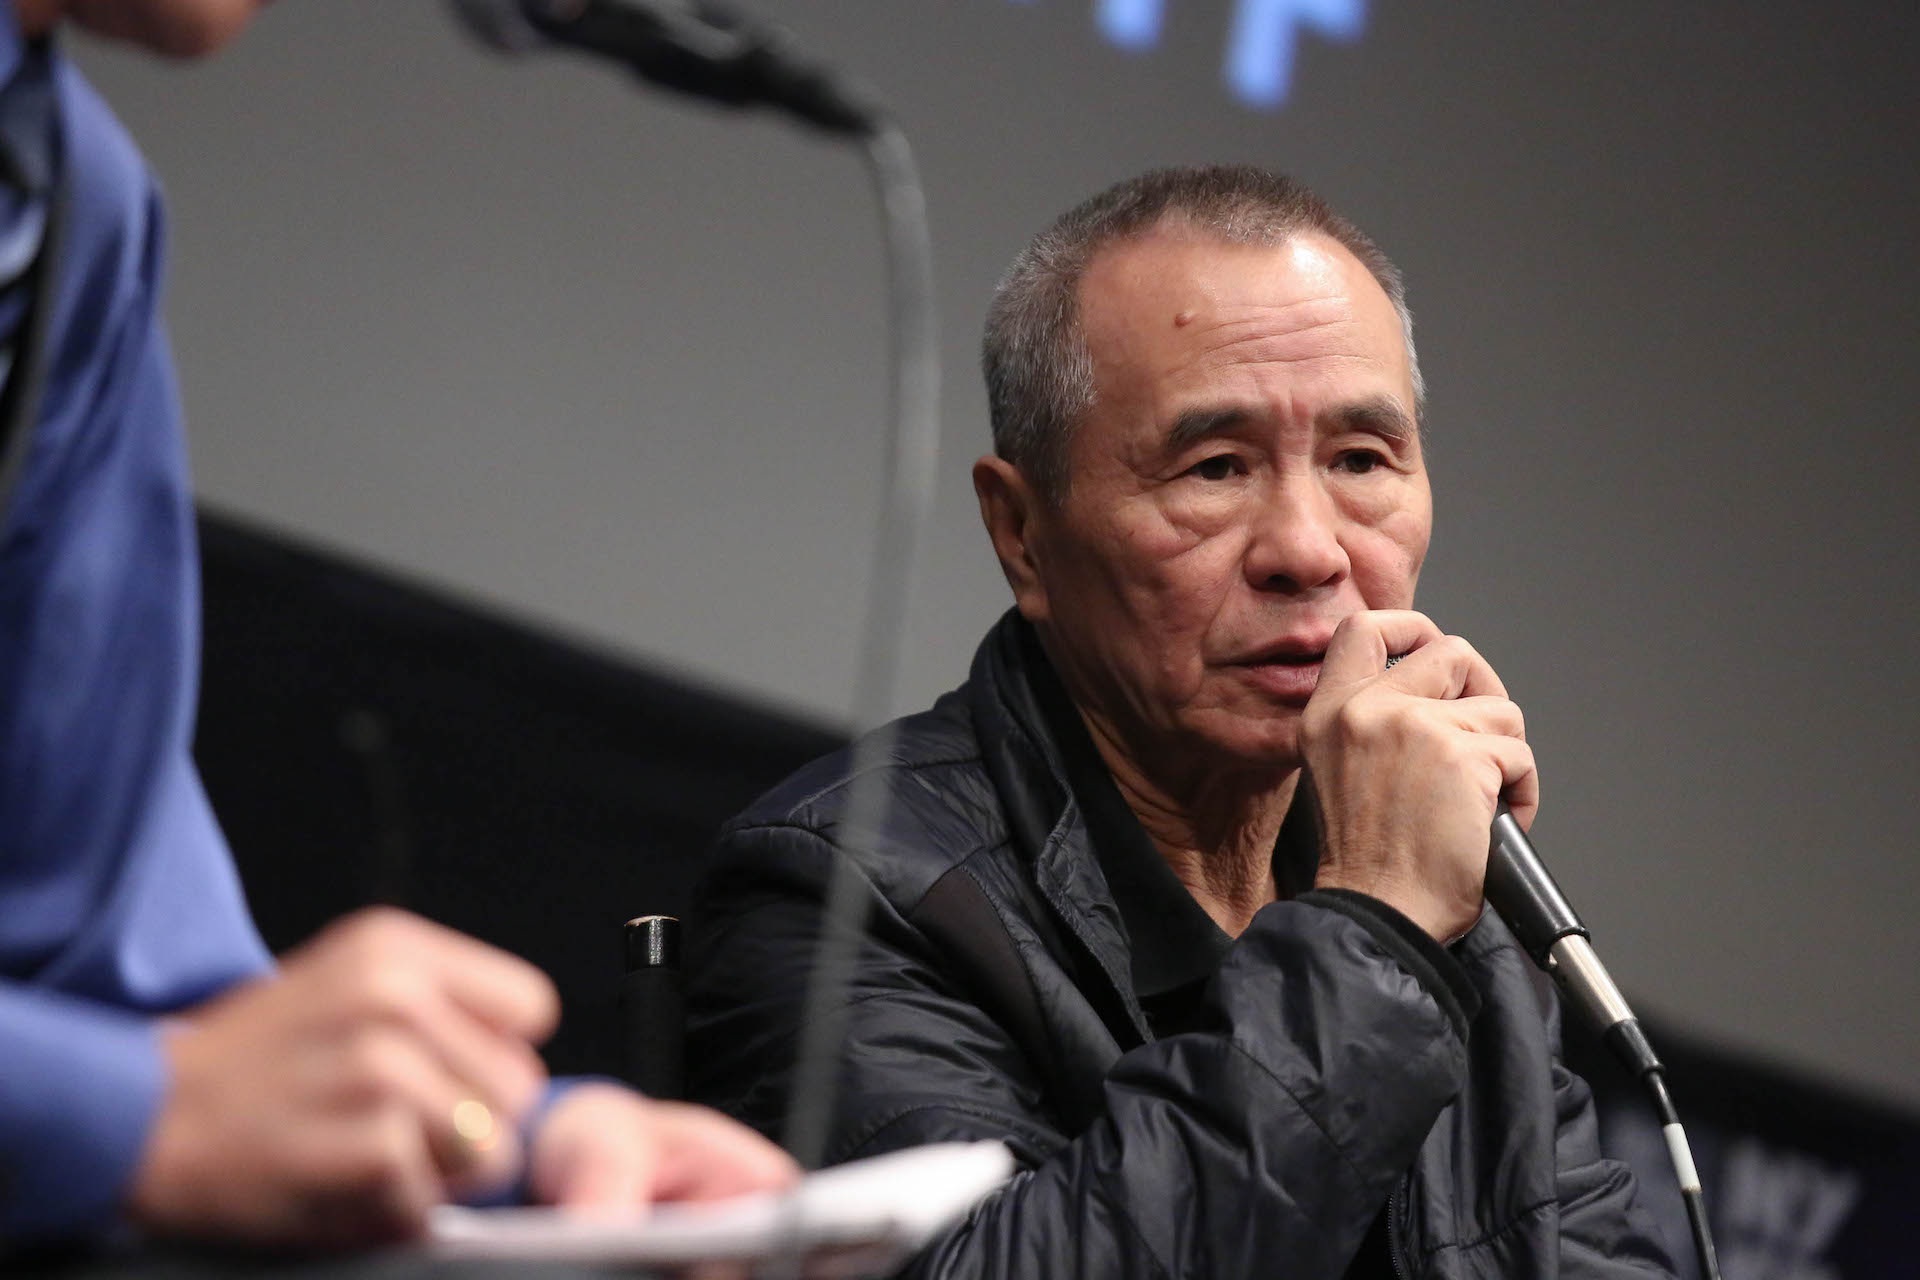 NEW YORK, NY - OCTOBER 10:  Taiwanese filmmaker Hou Hsiao-Hsien attends On Cinema: Hou Hsiao-Hsien during the 53rd New York Film Festival at The Film Society of Lincoln Center, Walter Reade Theatre on October 10, 2015 in New York City.  (Photo by Rob Kim/Getty Images)